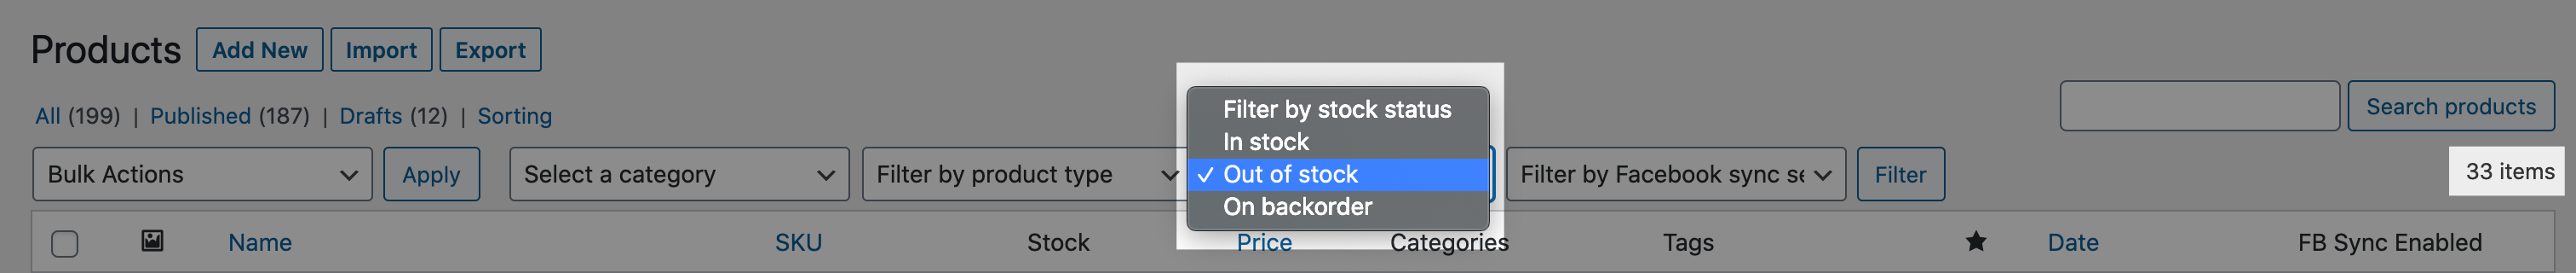 Filter products by stock status